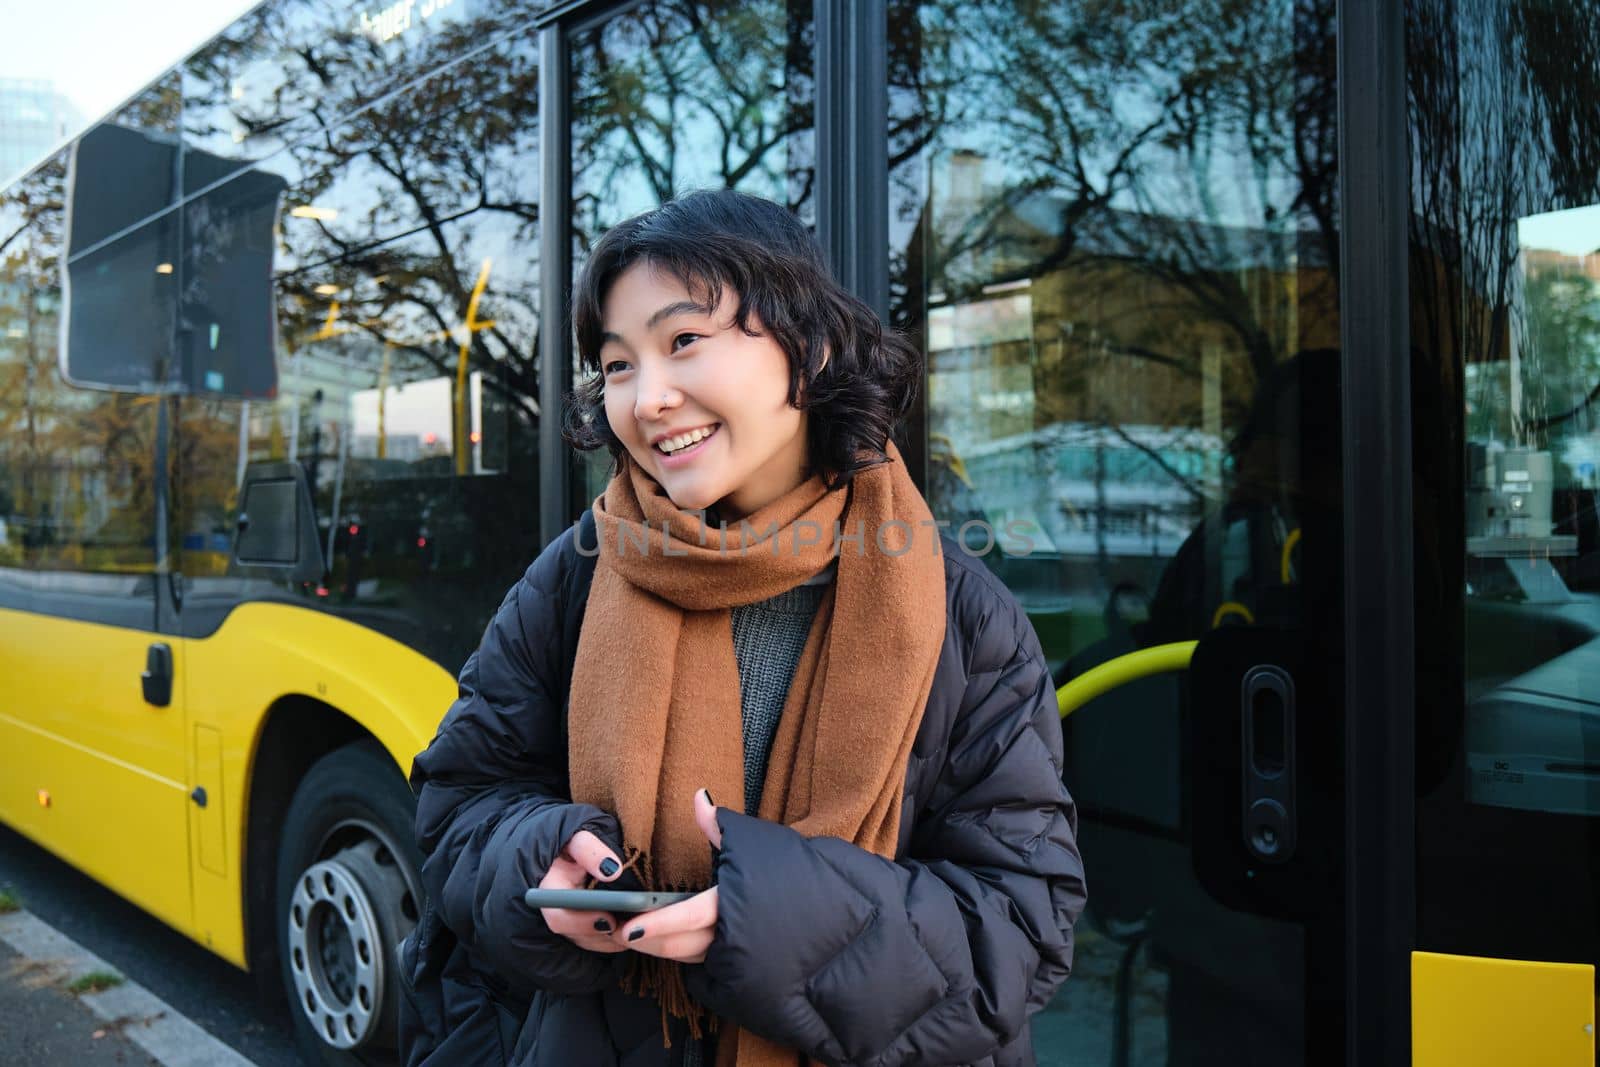 Young beautiful woman standing on bus stop, texting message on smartphone, holding mobile phone, checking her schedule, buying ticket online, wearing winter clothes.